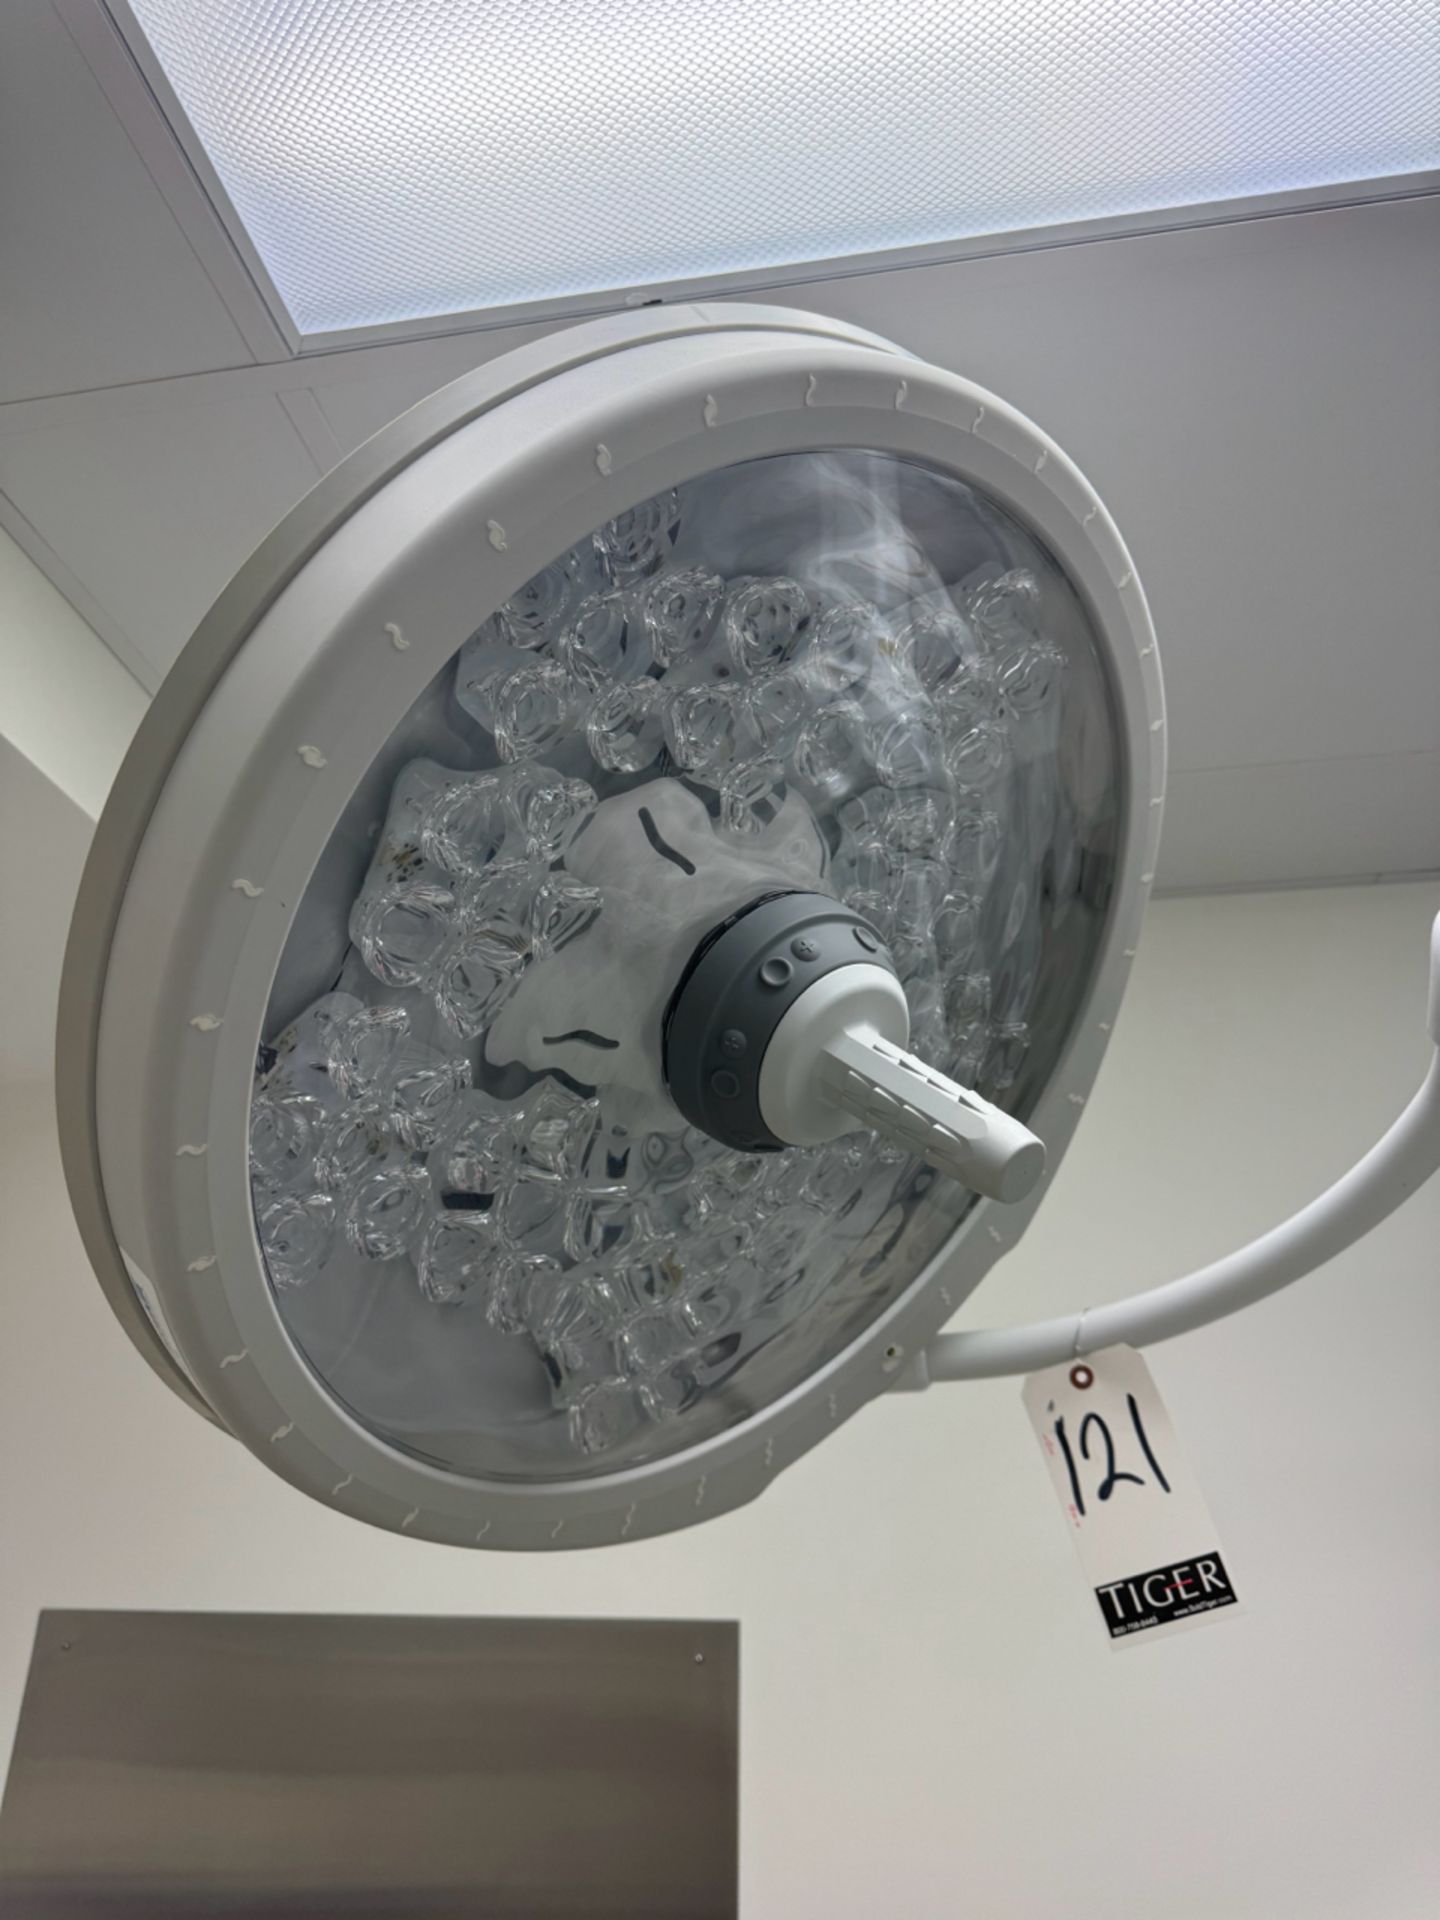 Steris Surgical Lighting System - Image 2 of 6